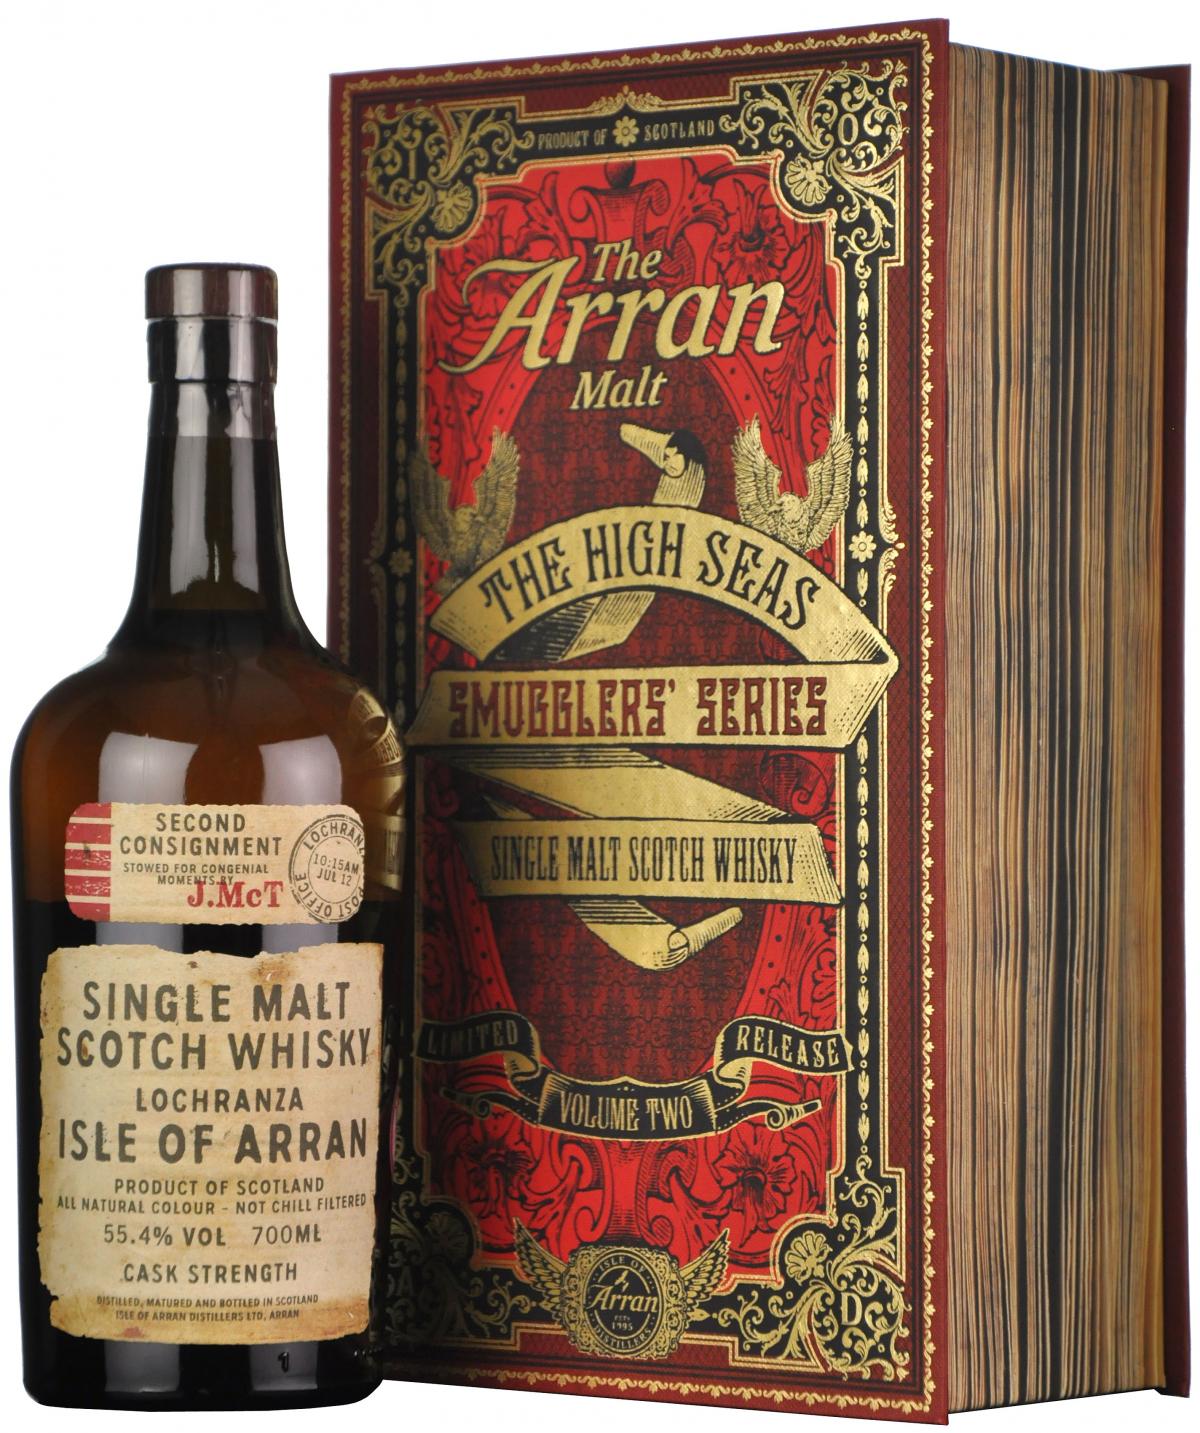 Arran The High Seas | Smugglers Series Volume Two